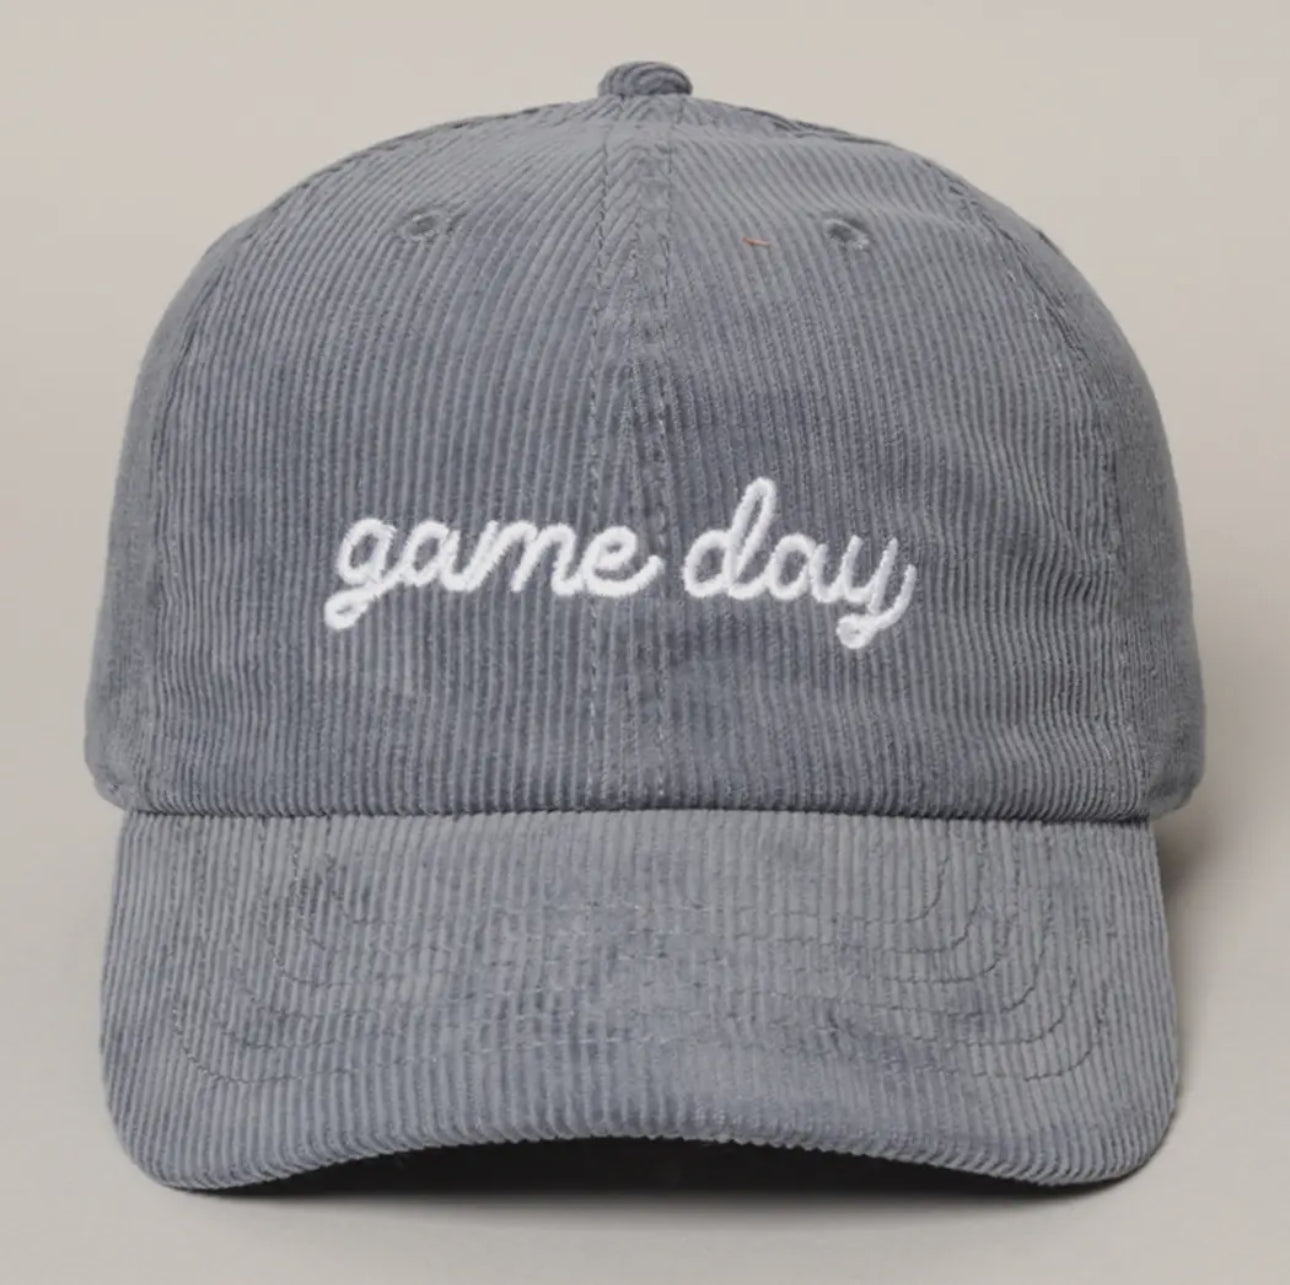 Game Day Embroidered Corduroy Hats